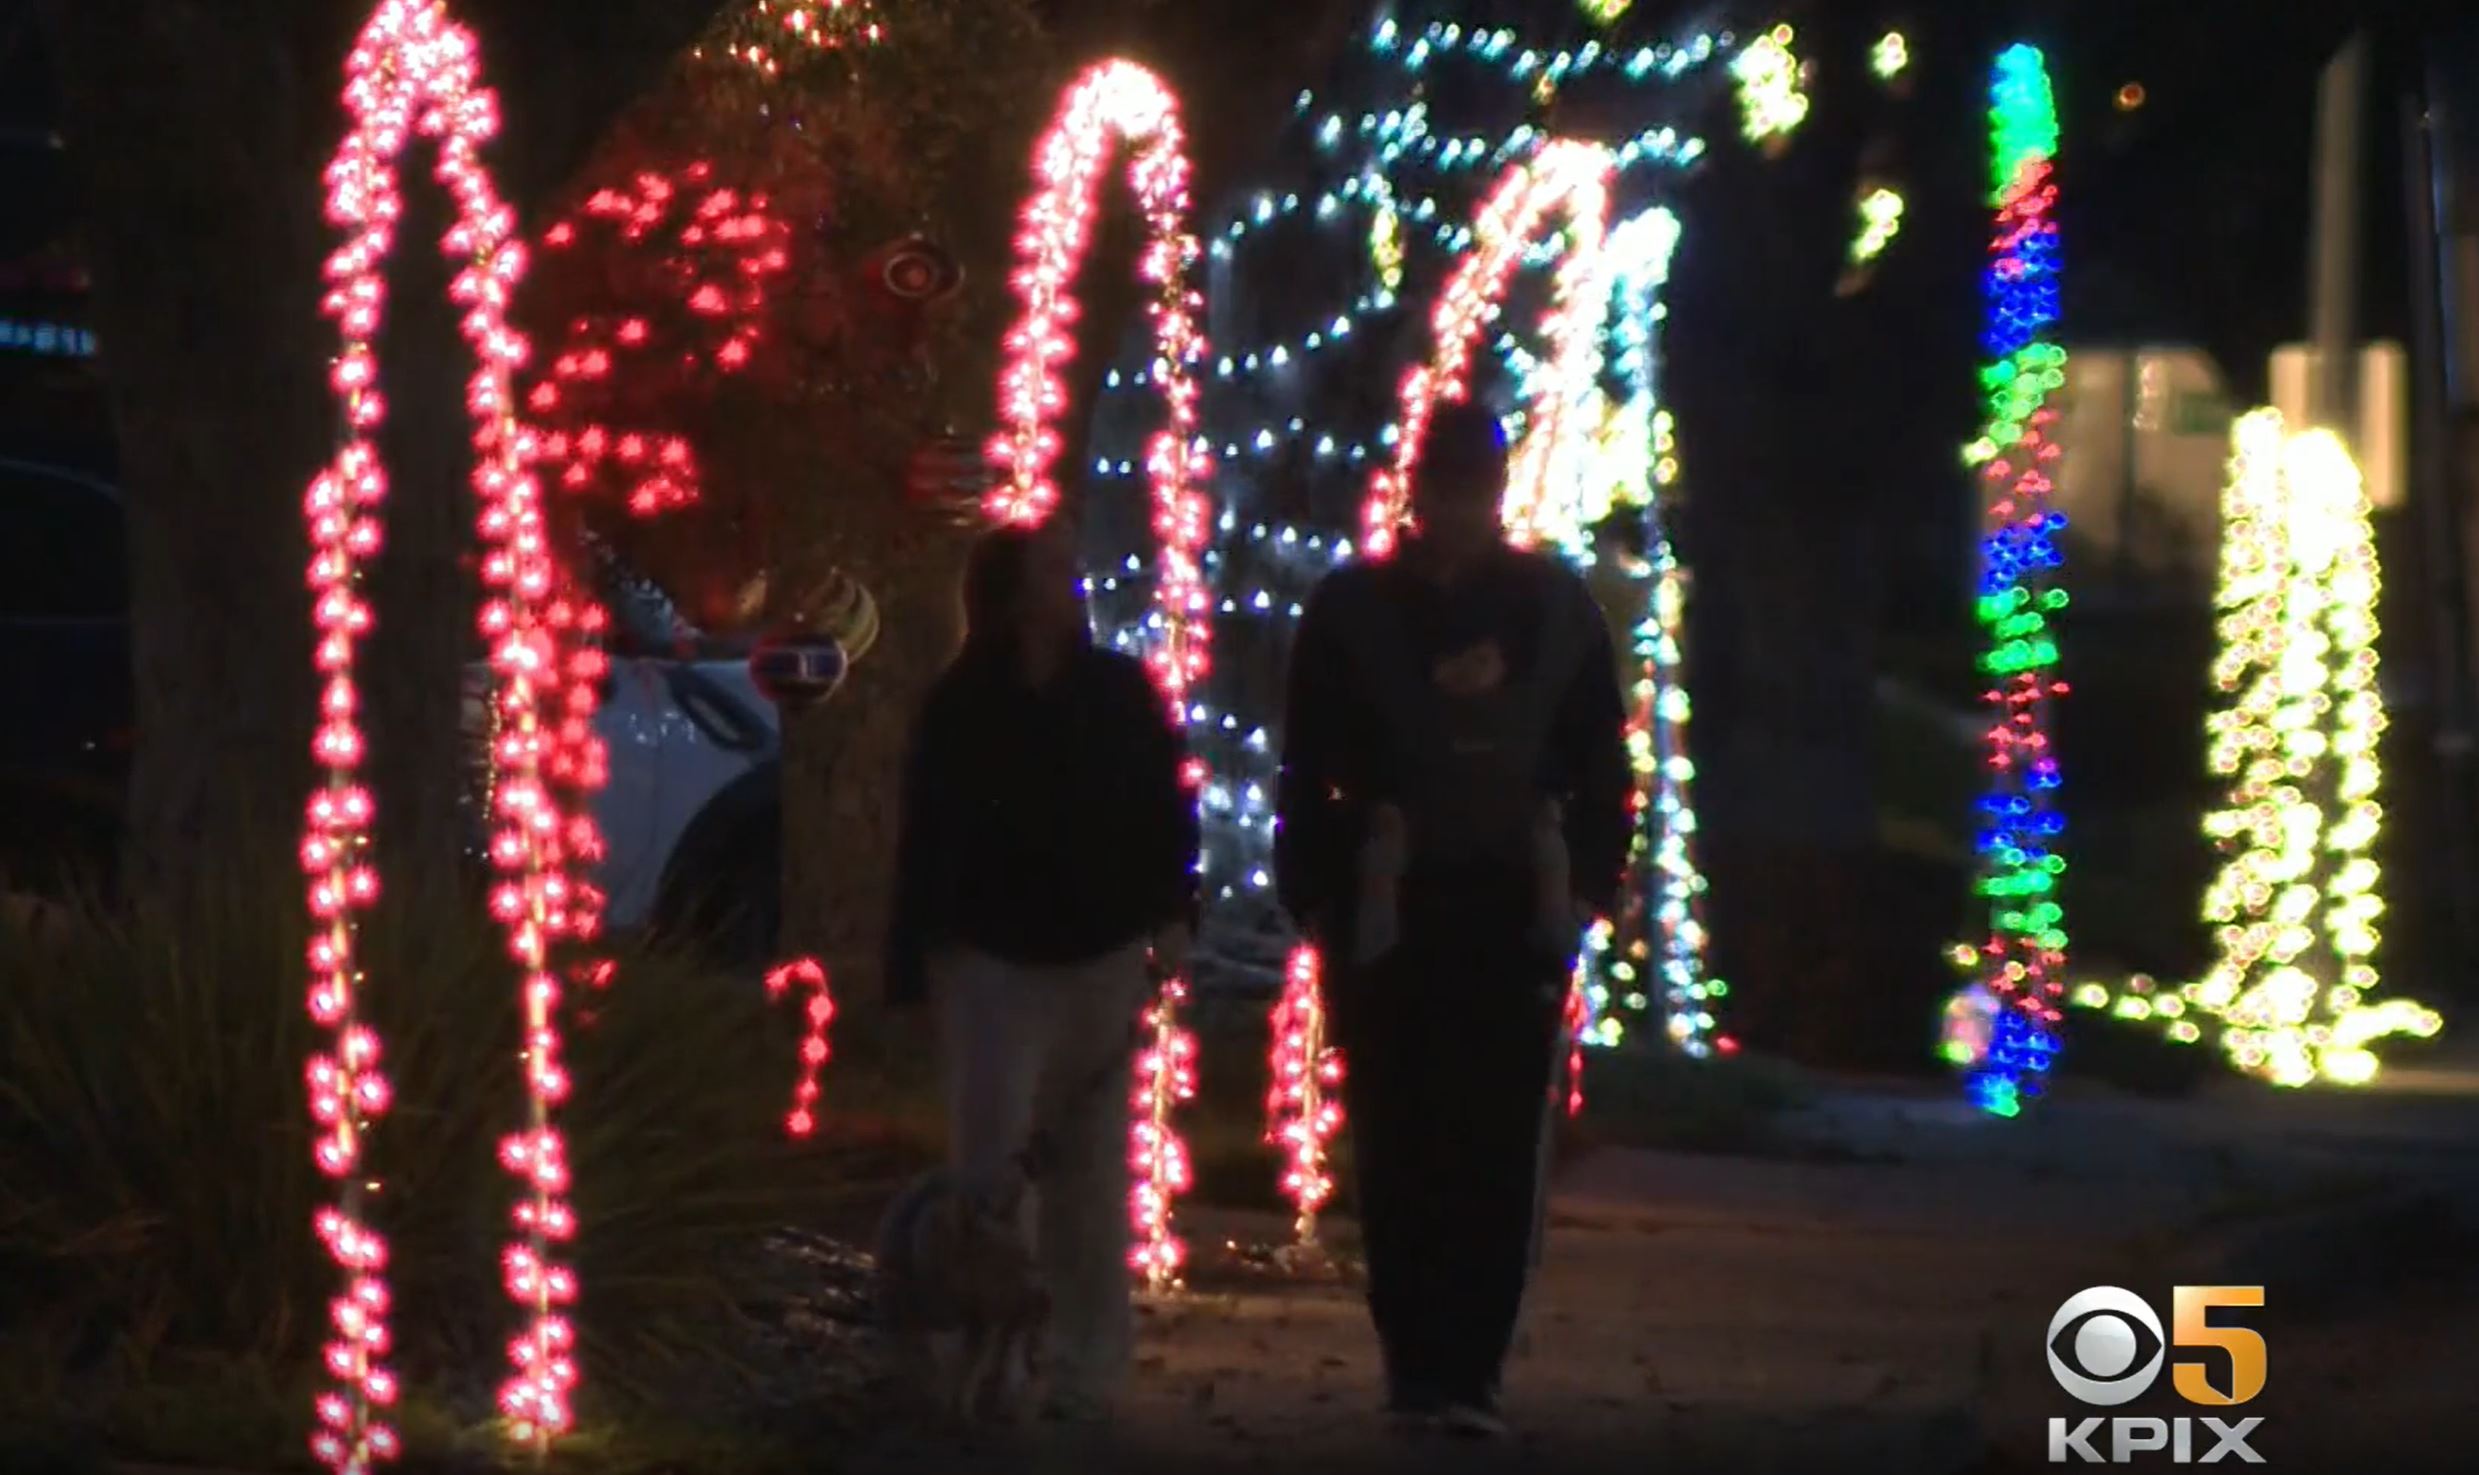 Livermore Neighborhood Decked Out For The Holiday Season